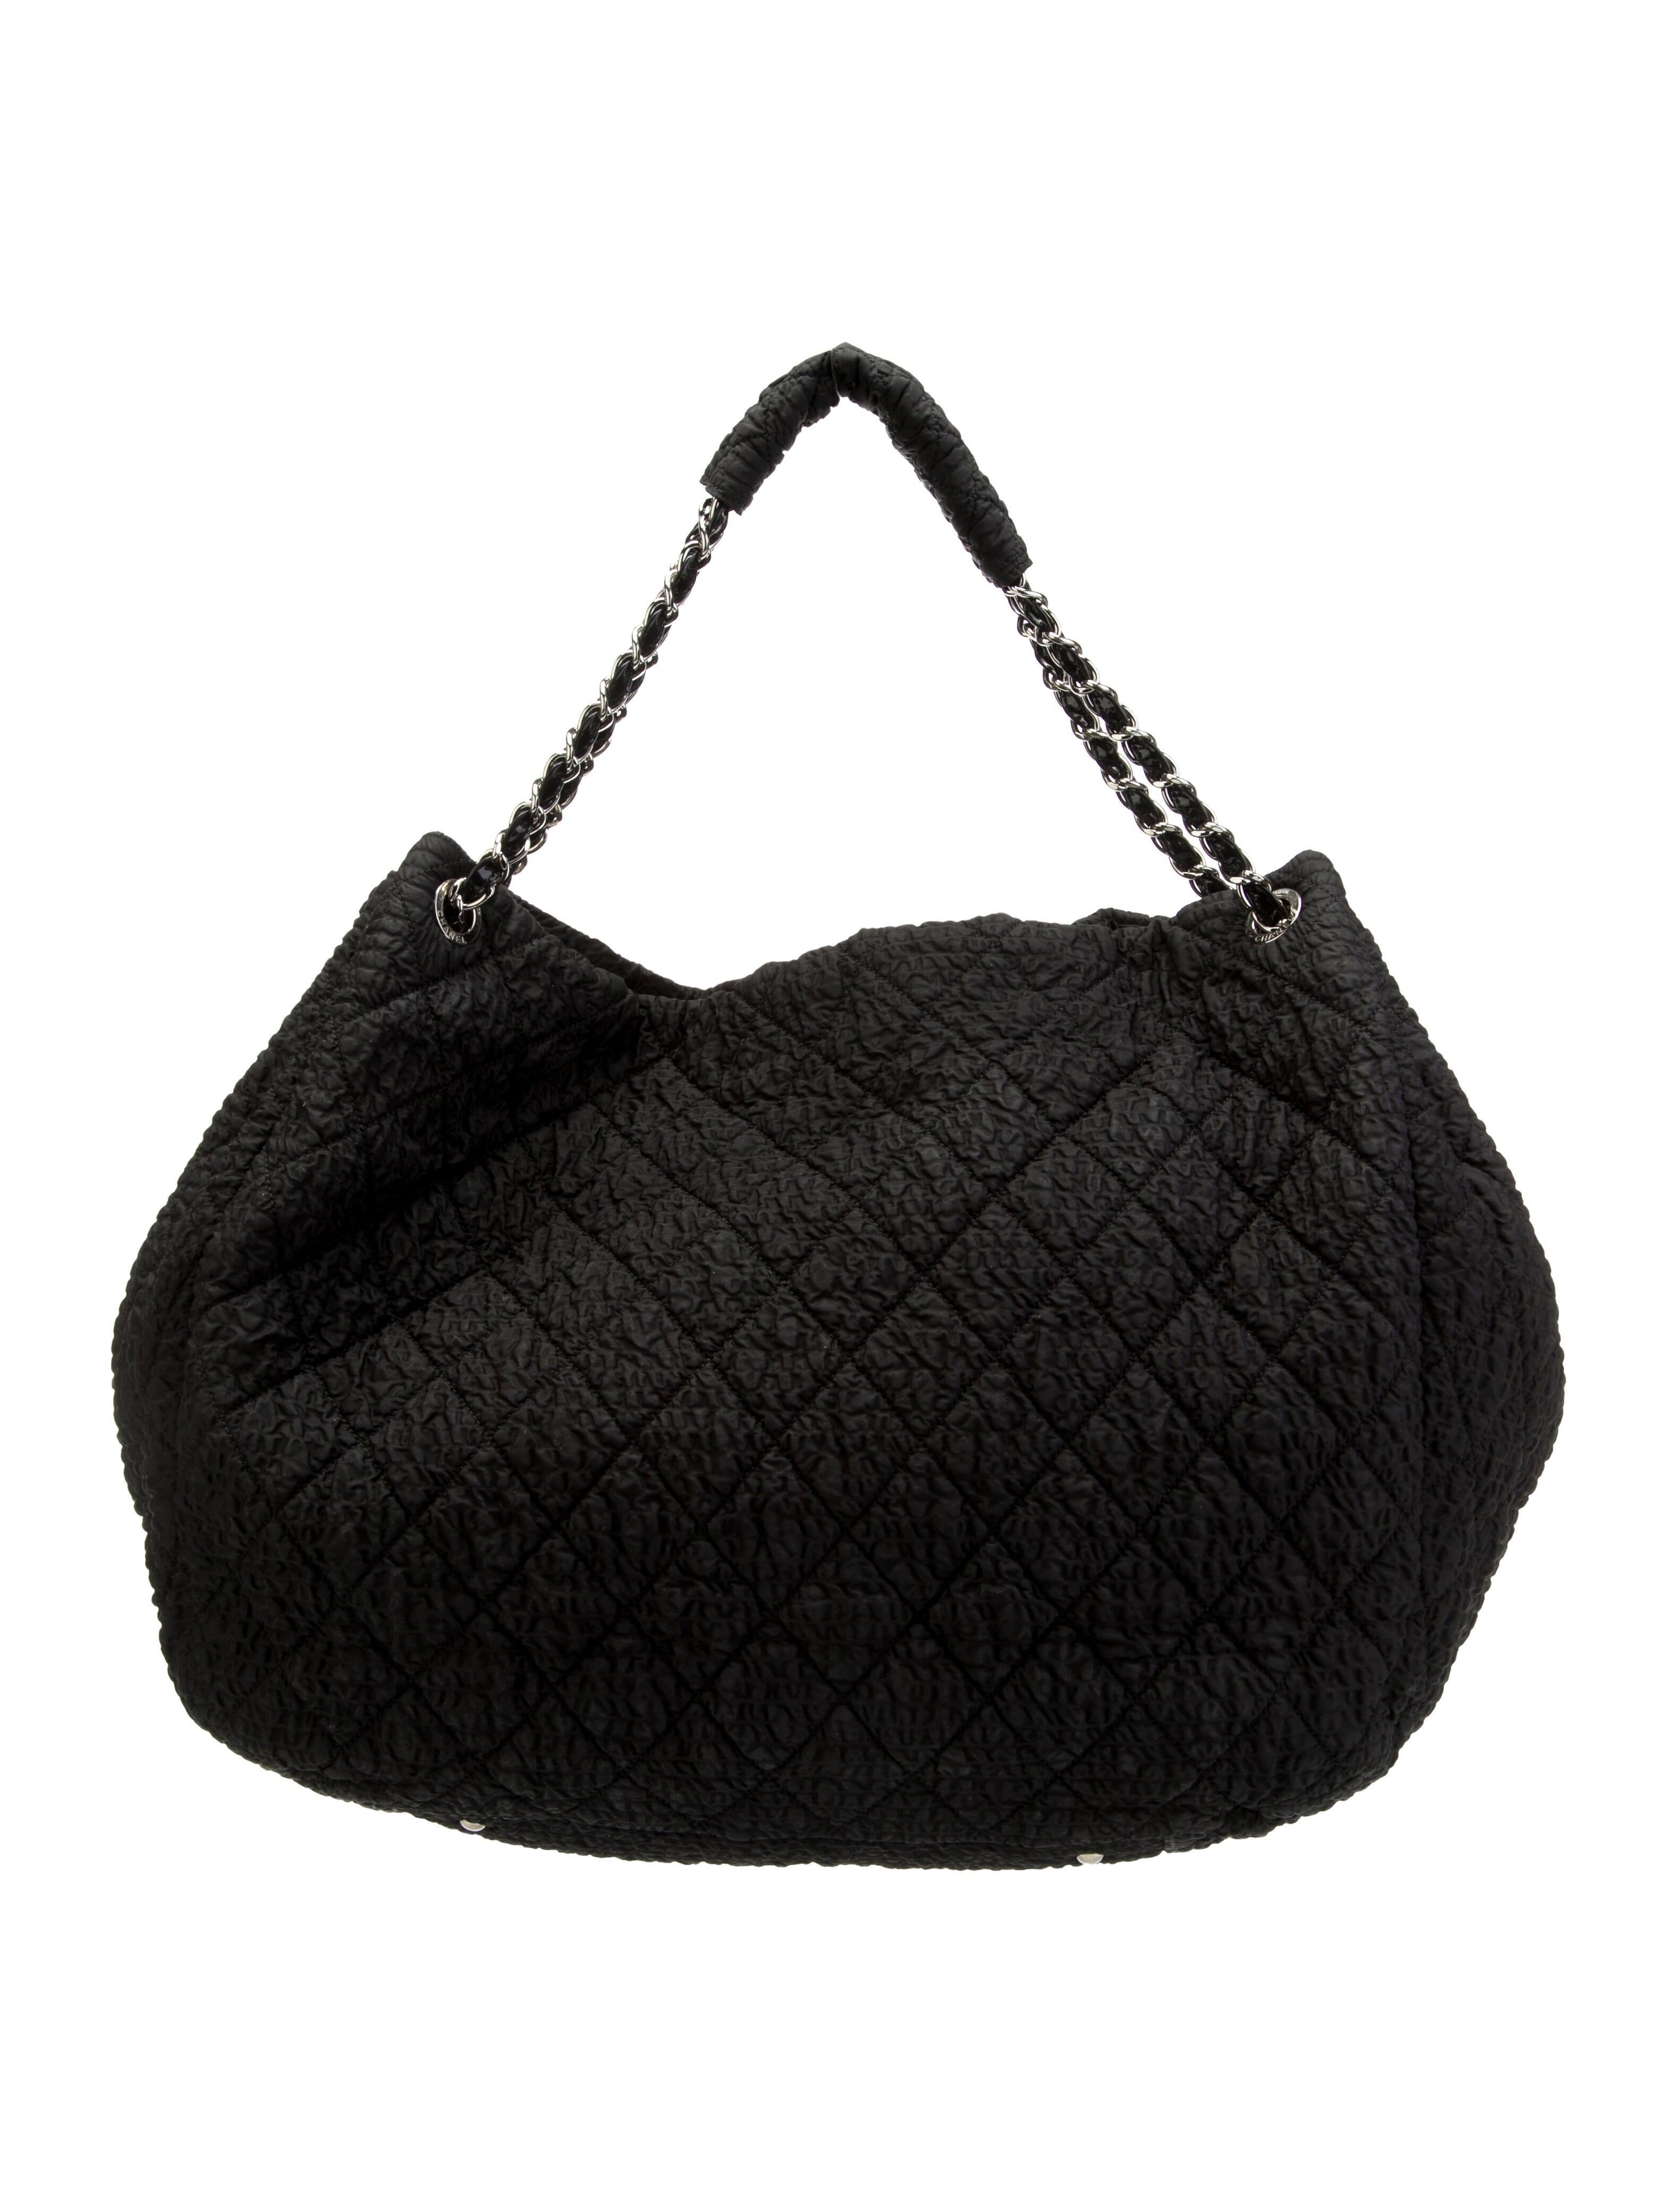 Chanel Coco Cabas Cabas Overnight Tote Black Microfiber Nylon Weekend Bag For Sale 2